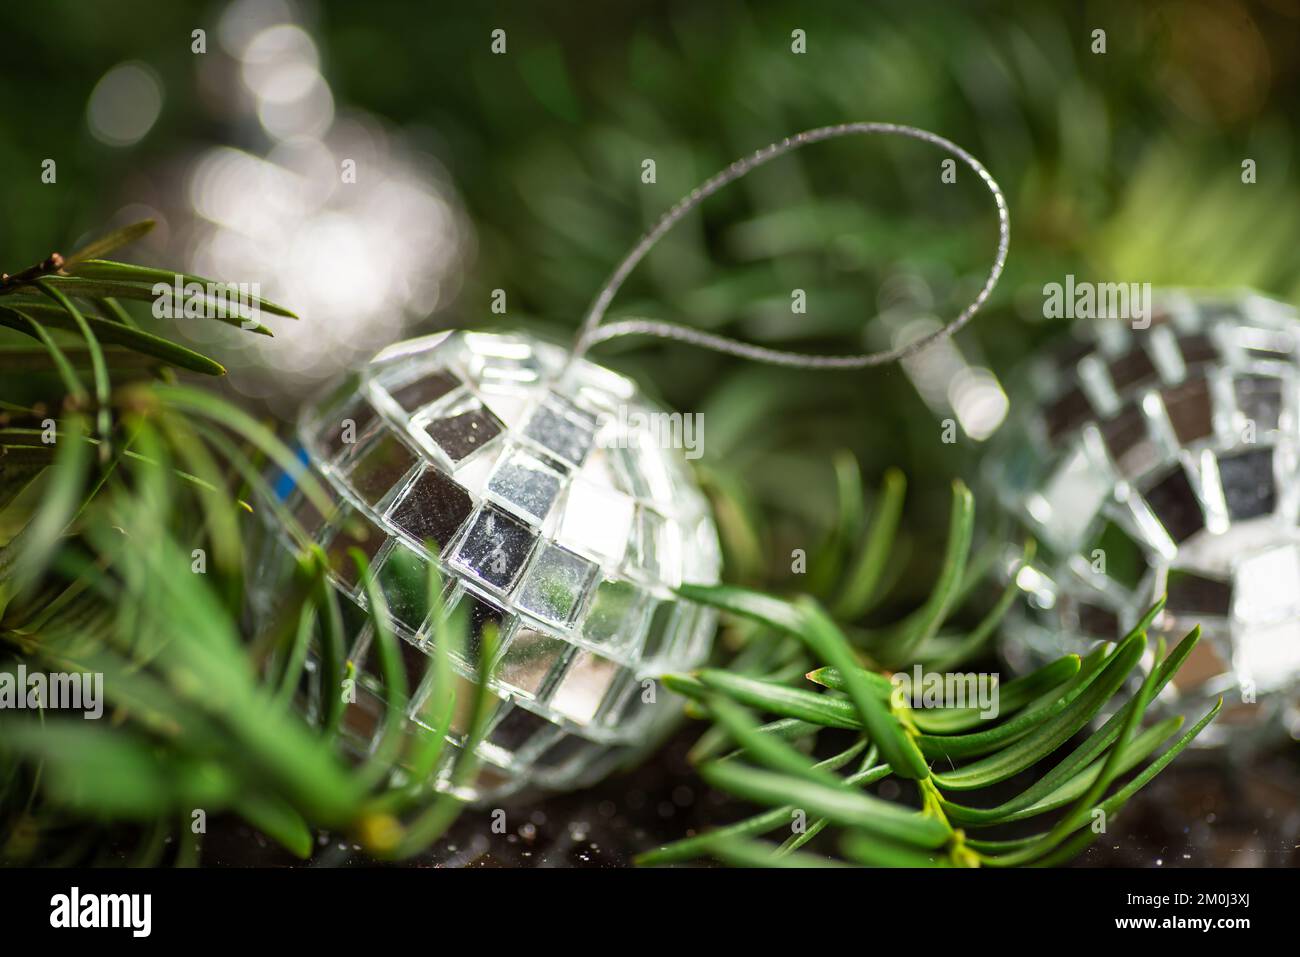 Festive winter holiday silver decoration and the Christmas tree with shiny fairy lights in the background Stock Photo